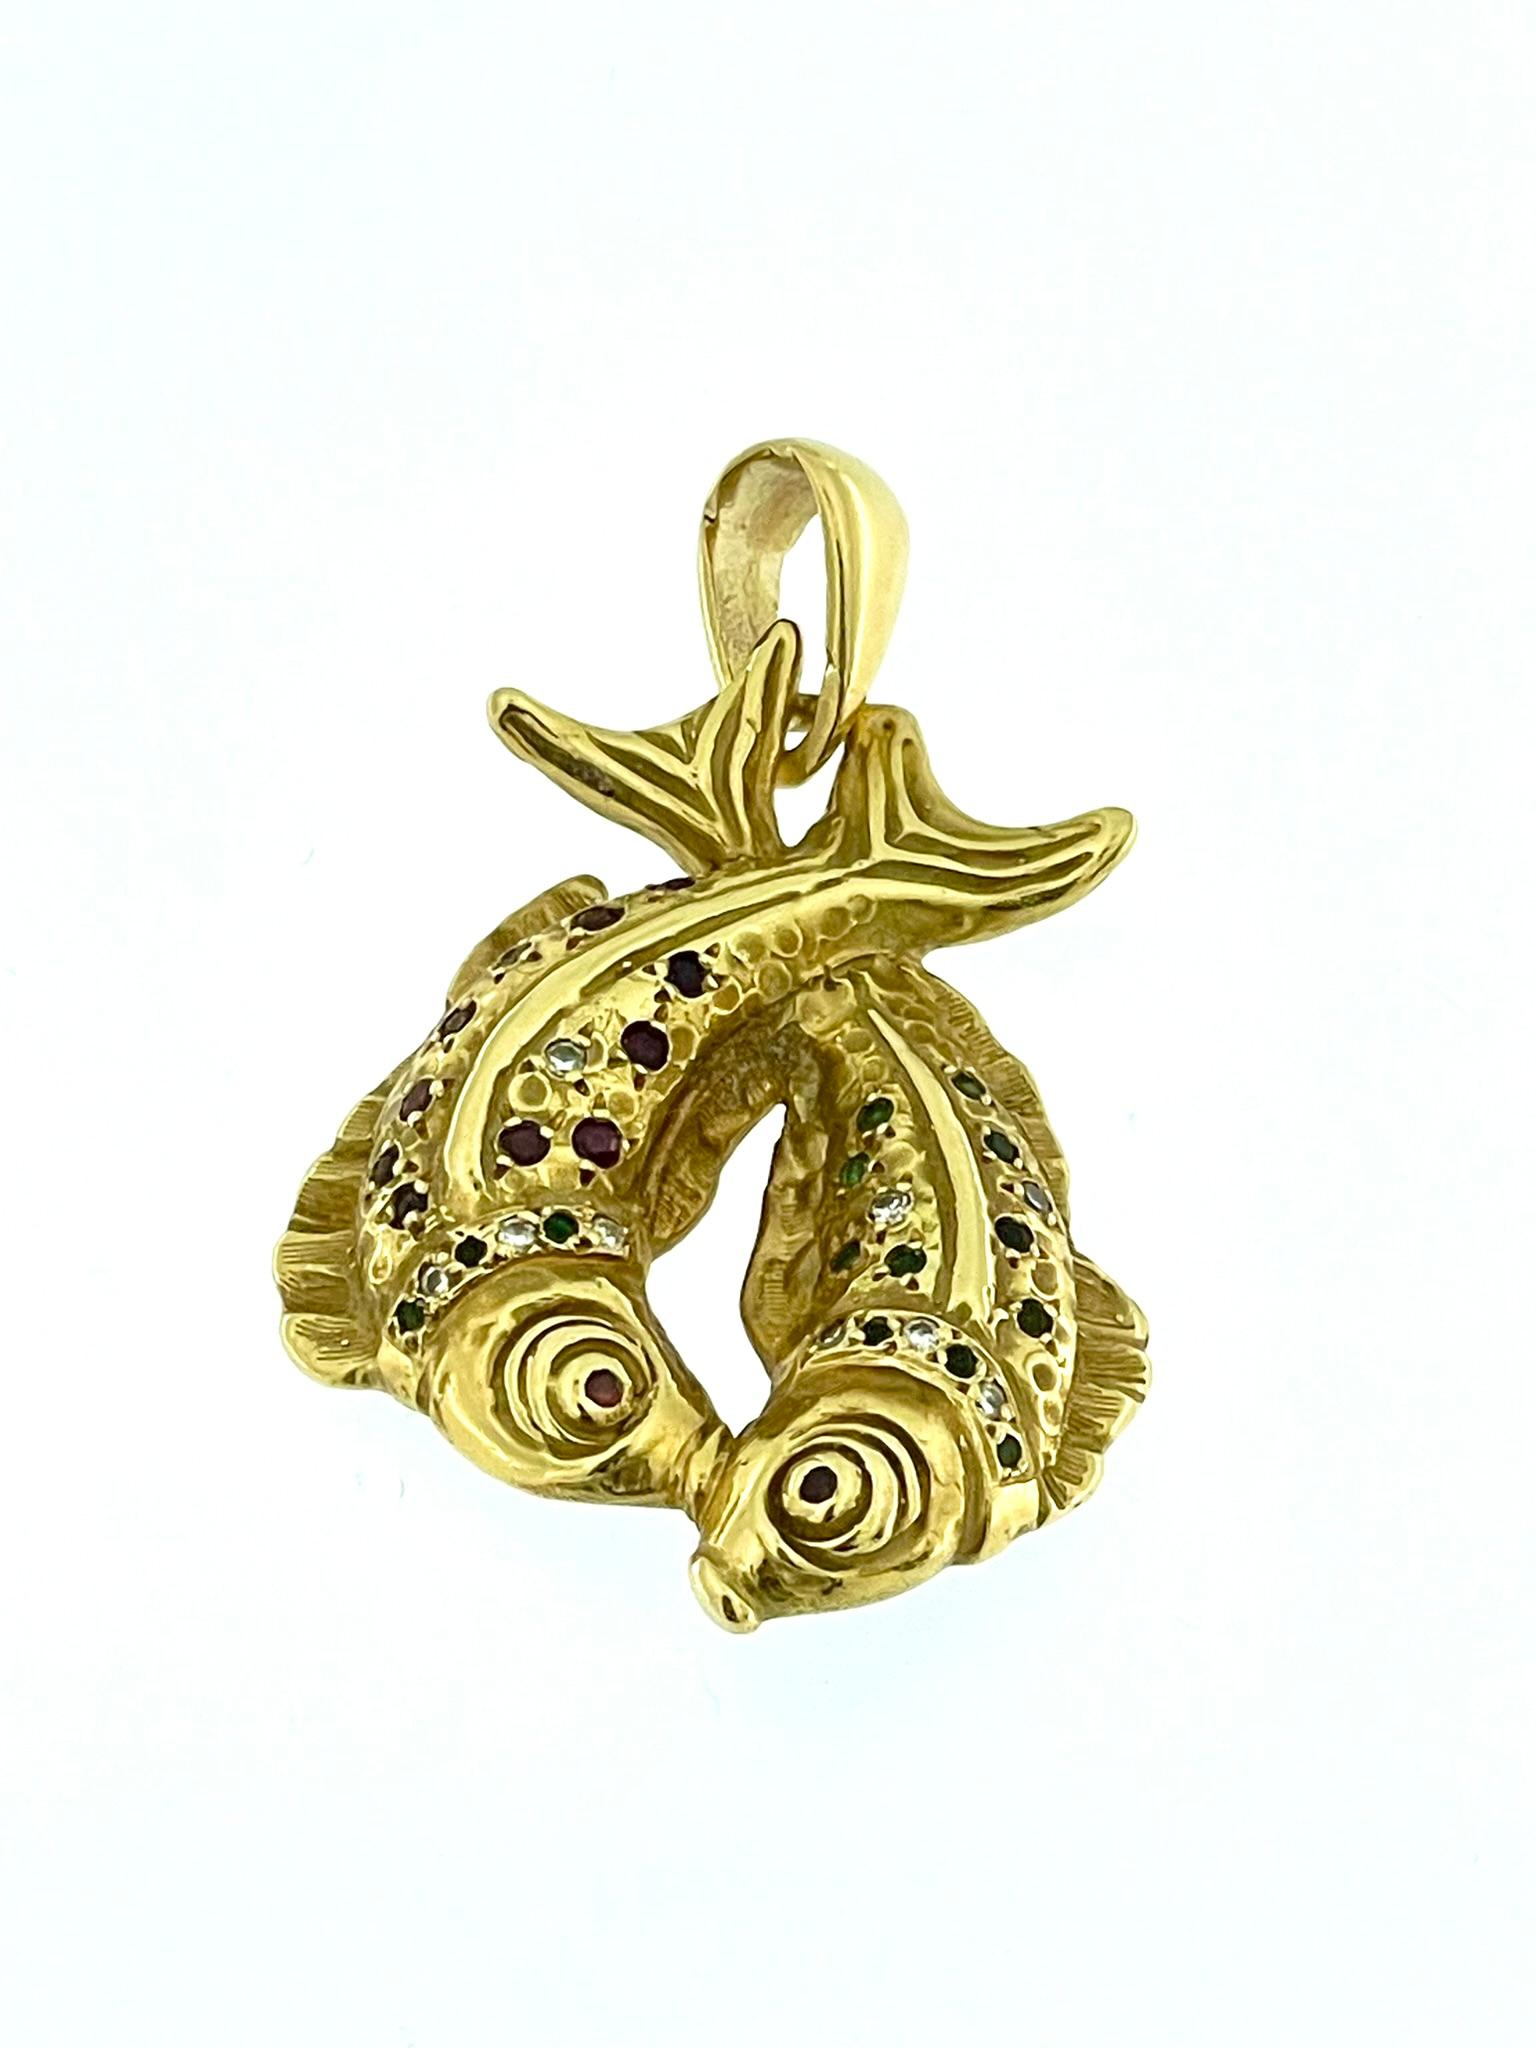 Vintage Yellow Gold Pisces Zodiac Sign Pendant with Gemstones In Good Condition For Sale In Esch-Sur-Alzette, LU